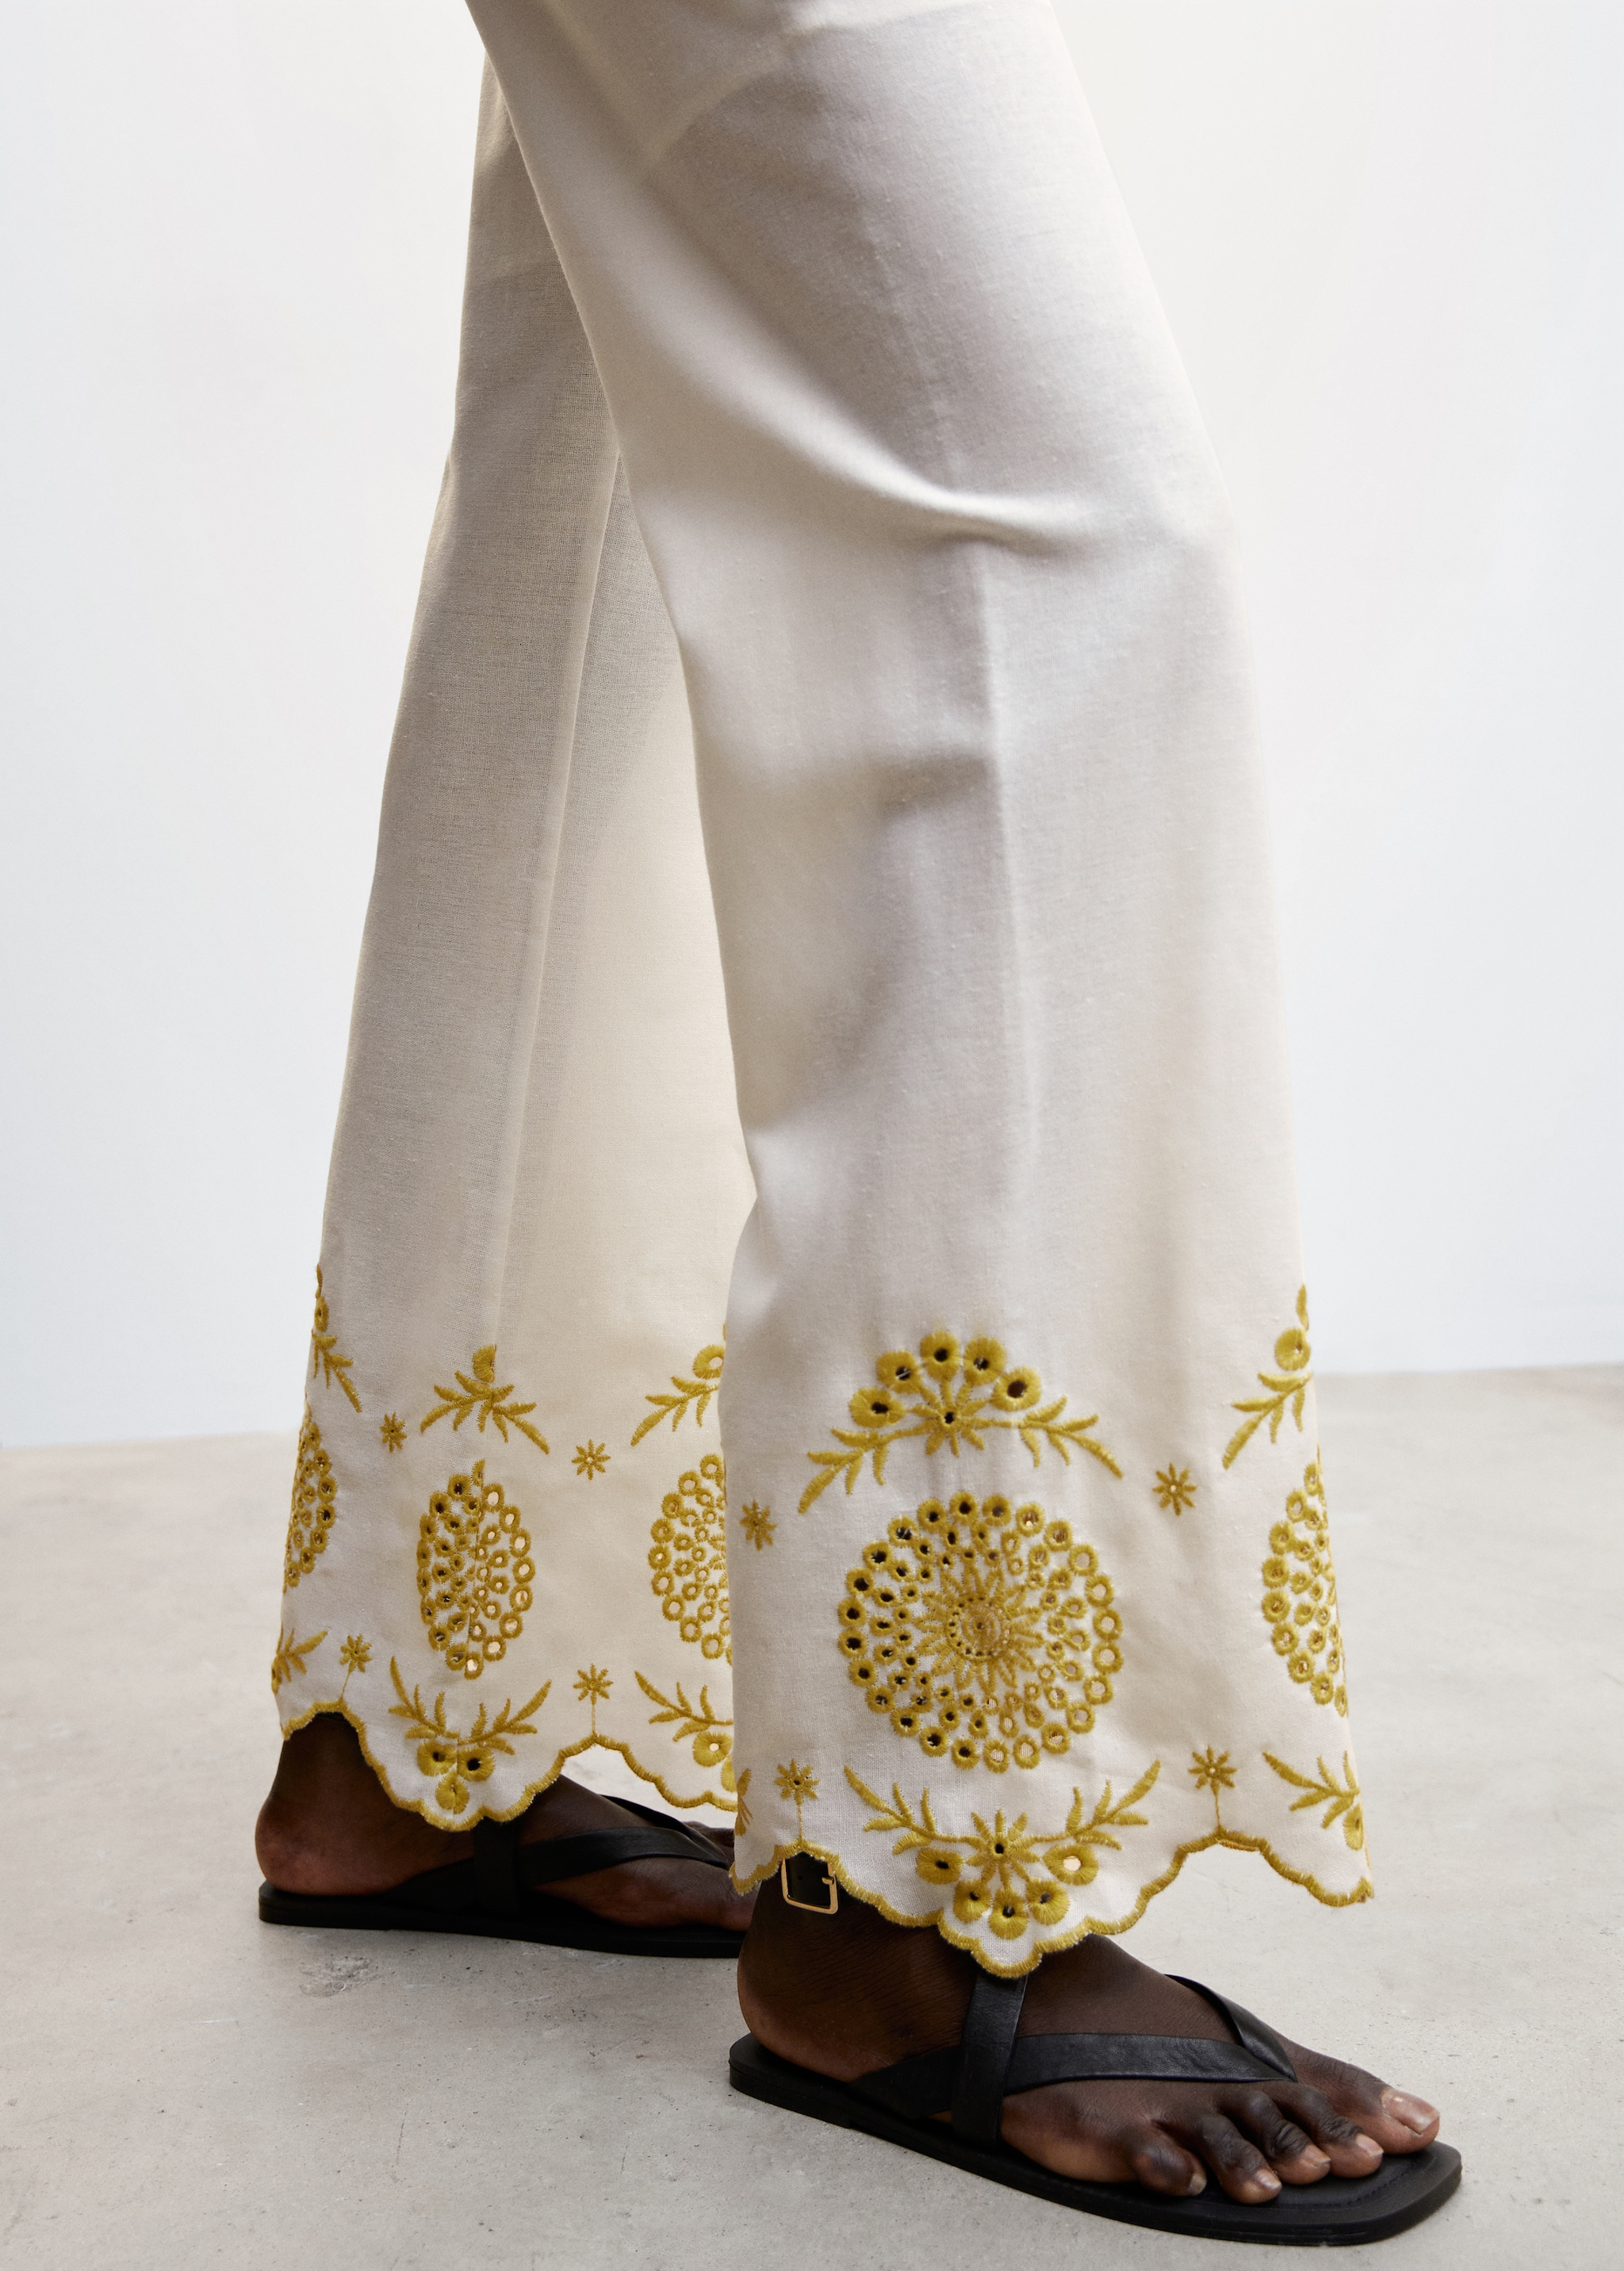 Swiss embroidered culotte pants - Details of the article 1